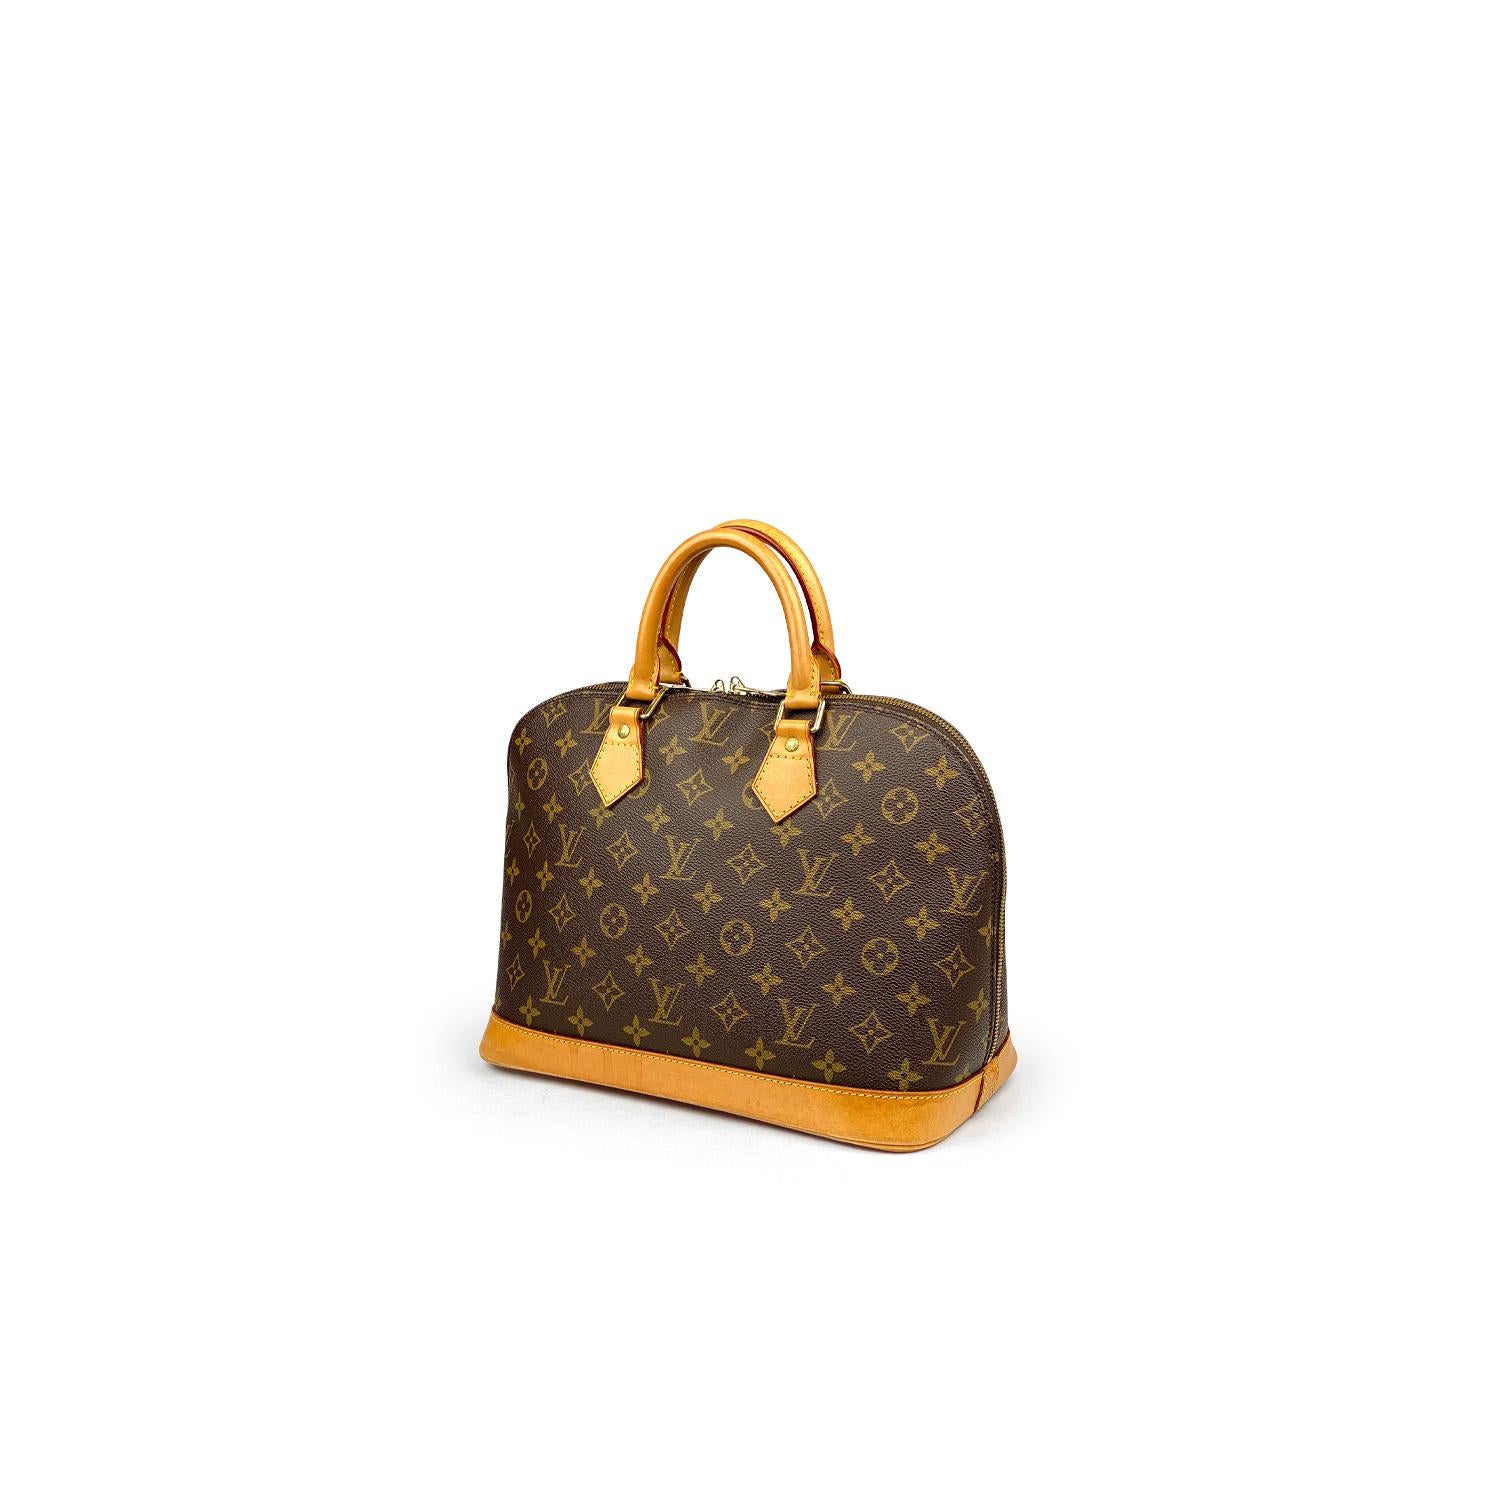 Brown and tan monogram coated canvas Louis Vuitton Alma PM with

– Brass hardware
– Tan vachetta leather trim
– Dual rolled top handles
– Brown canvas lining
– Single slip pocket at interior and two-way zip closure at top

Overall Preloved